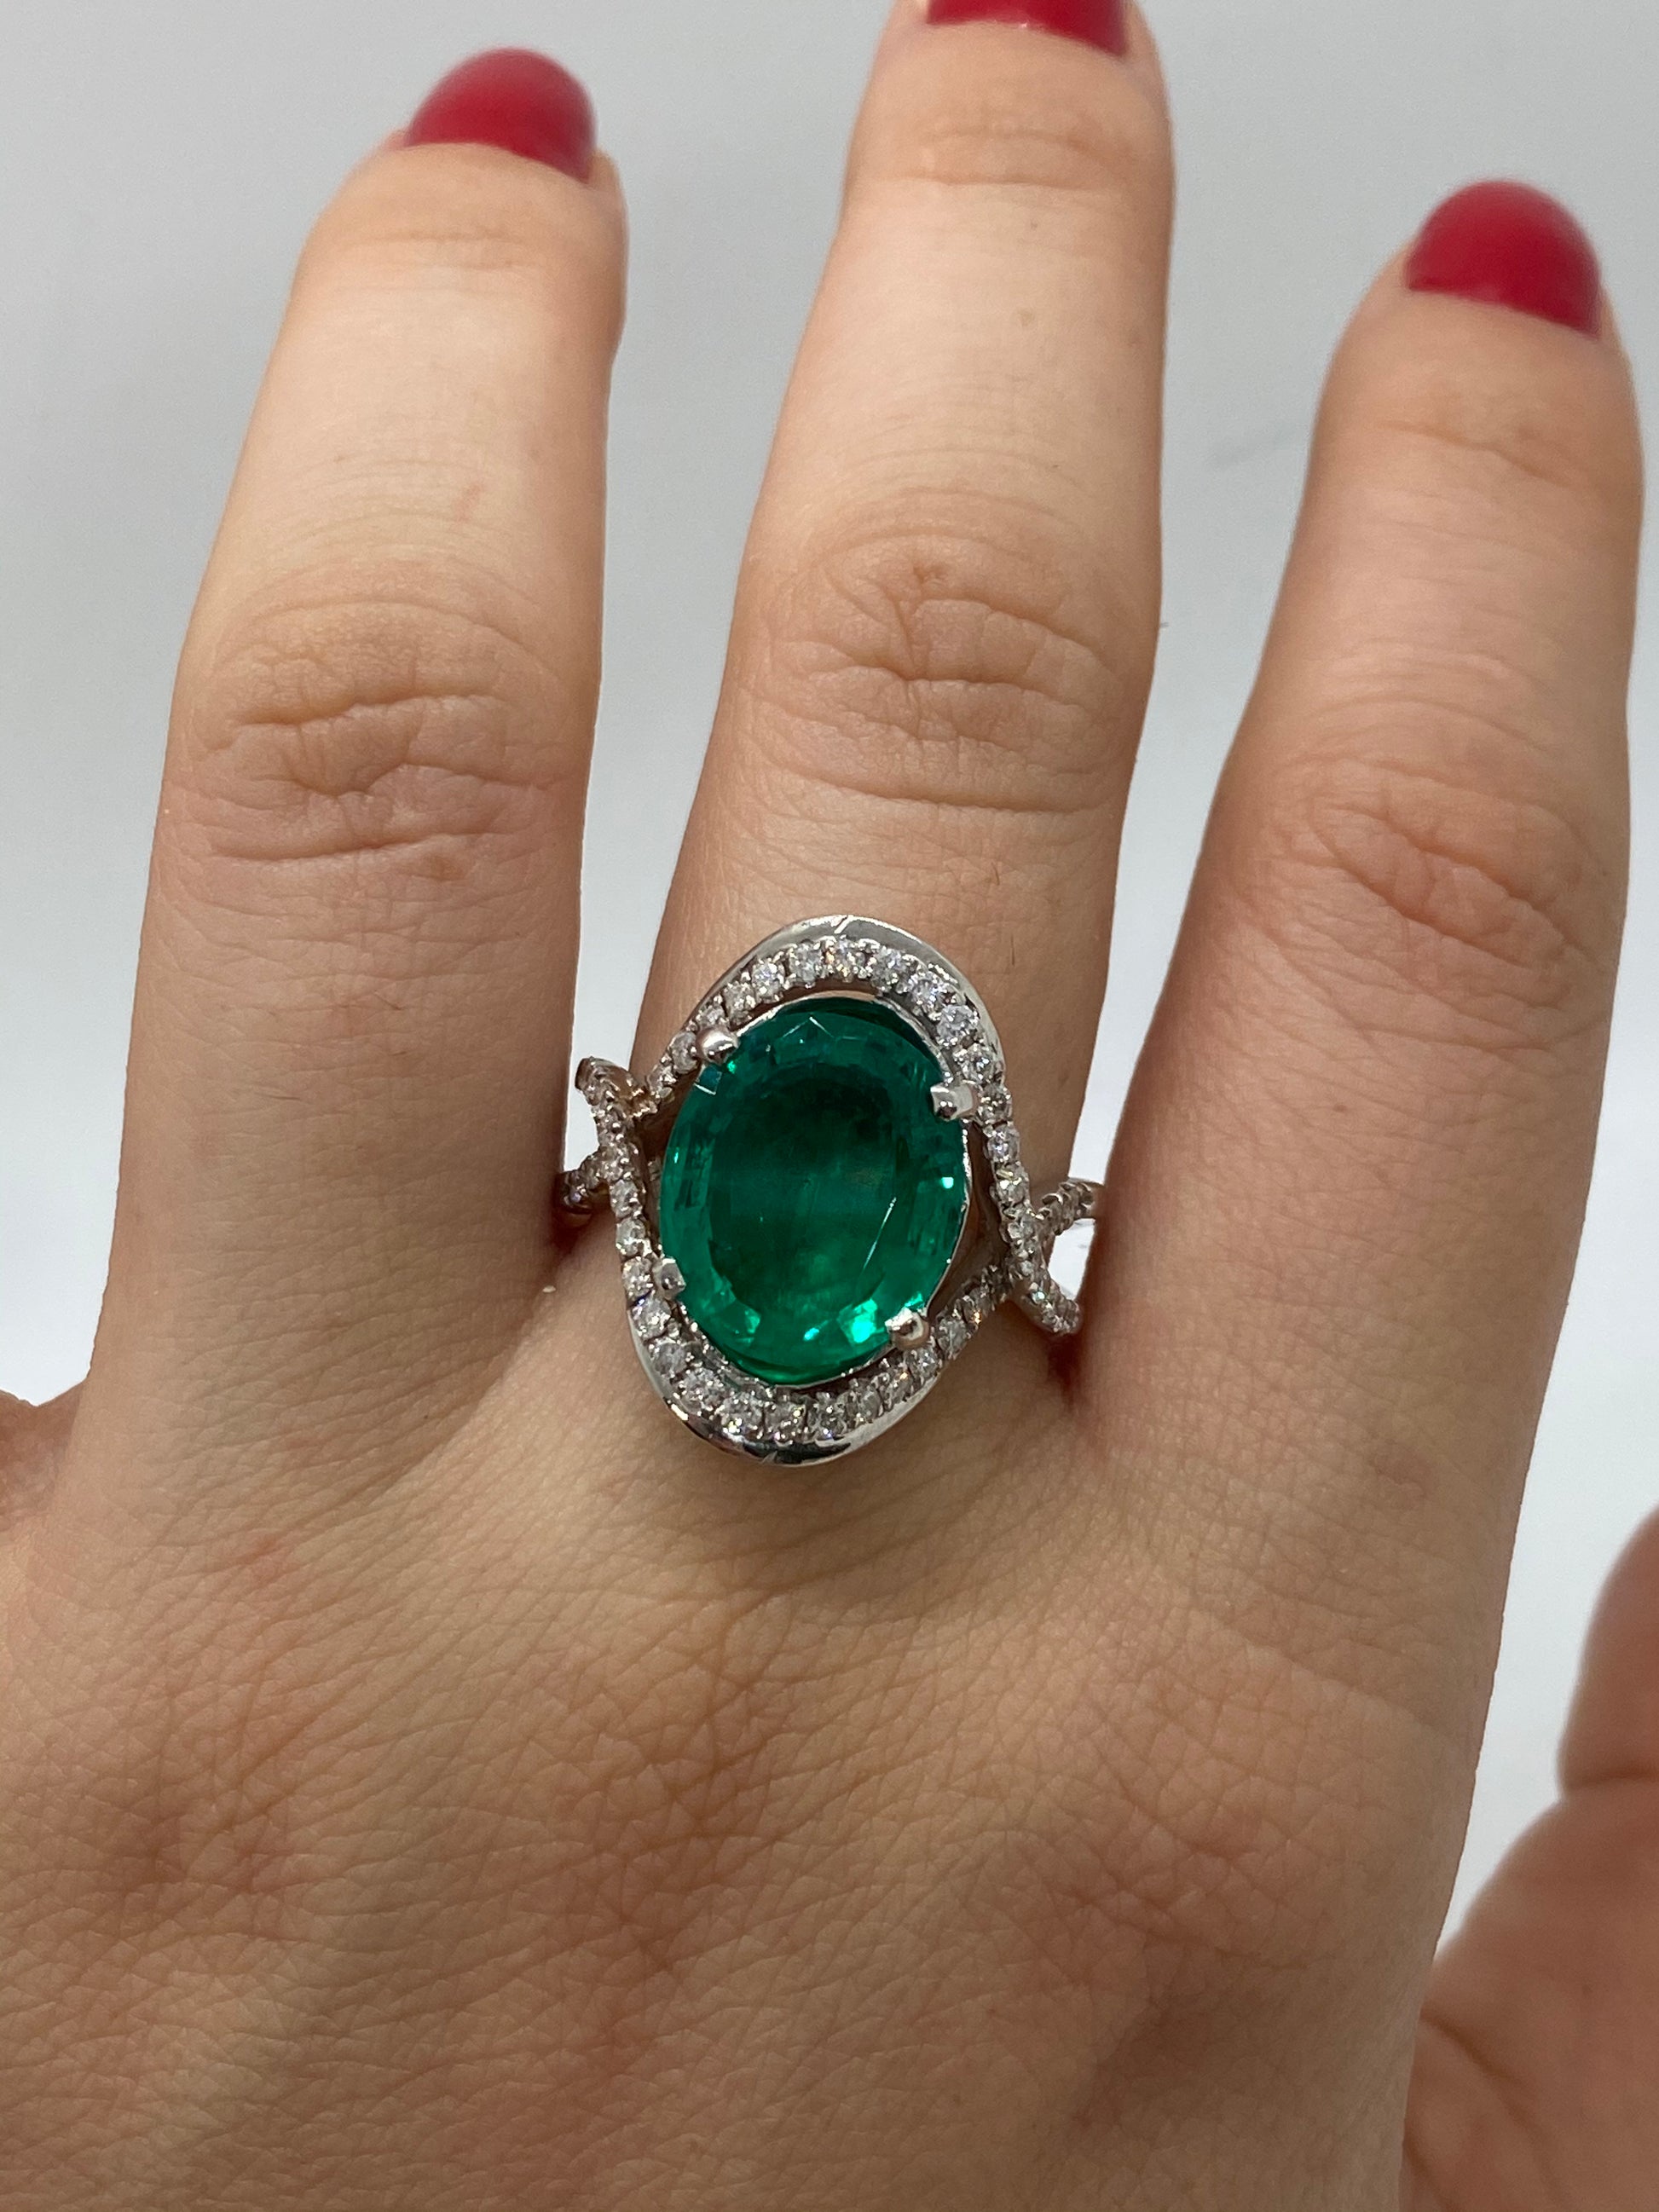 Emerald Ring E12010 - Royal Gems and Jewelry